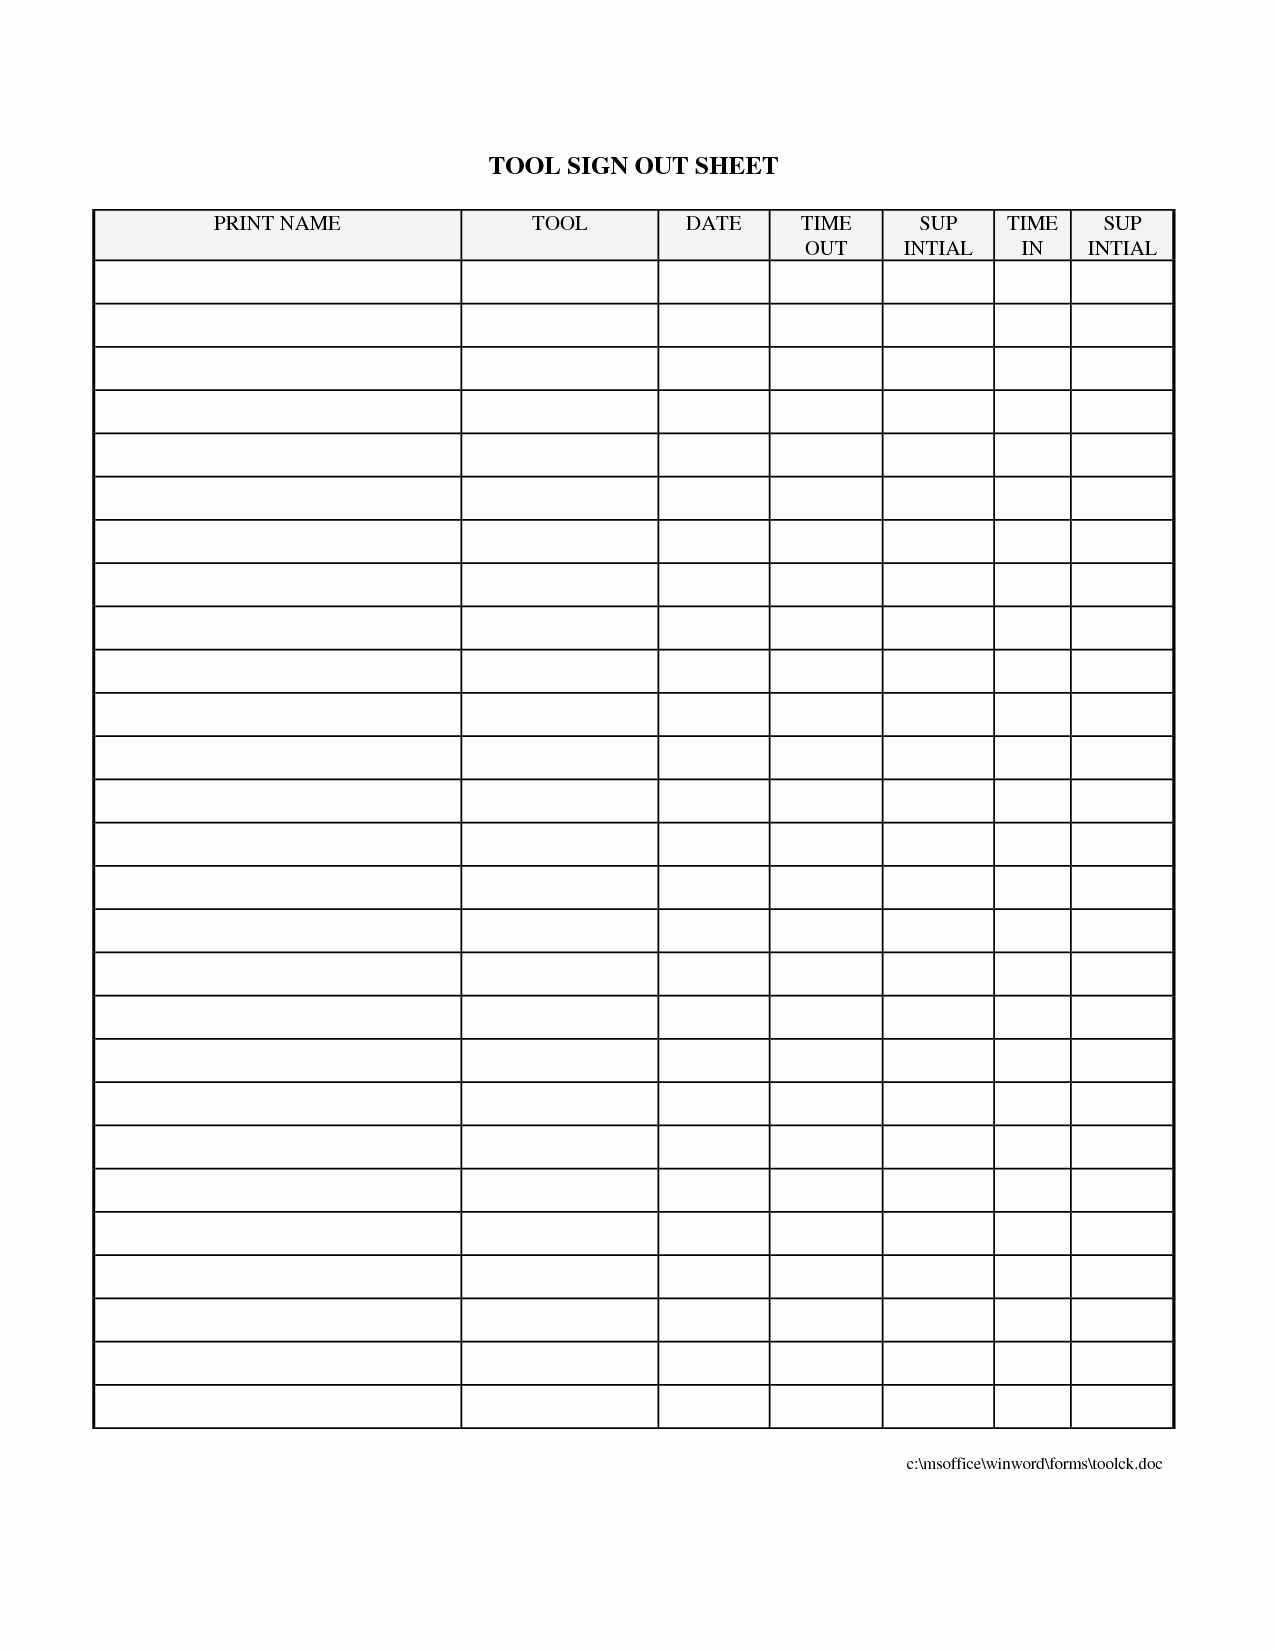 Check In Sheet Template Lovely Printable Sign Out Sheet Template